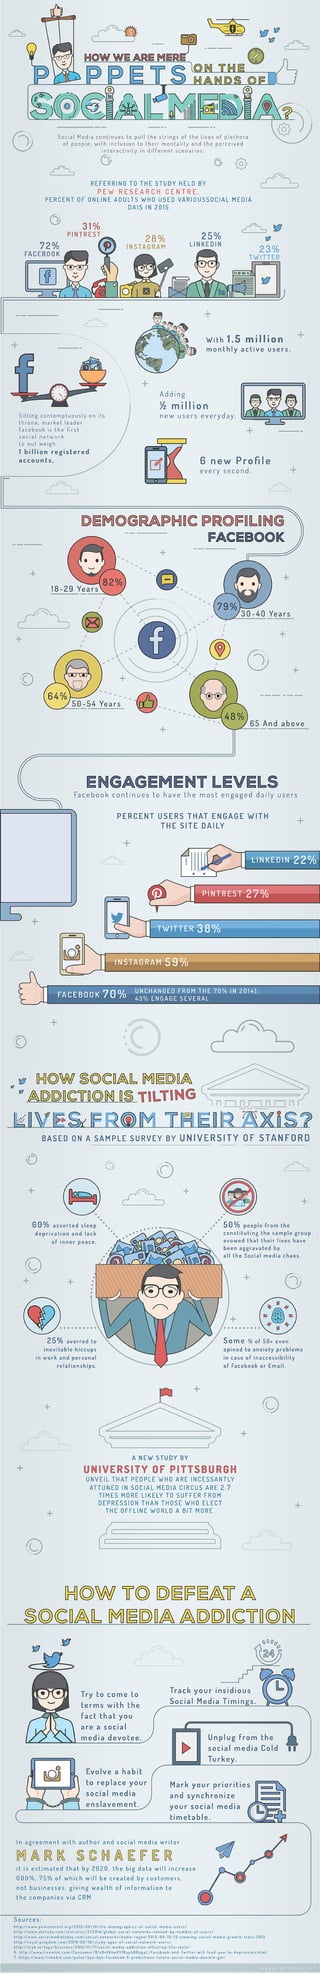 Infographic for studies on social media usage.